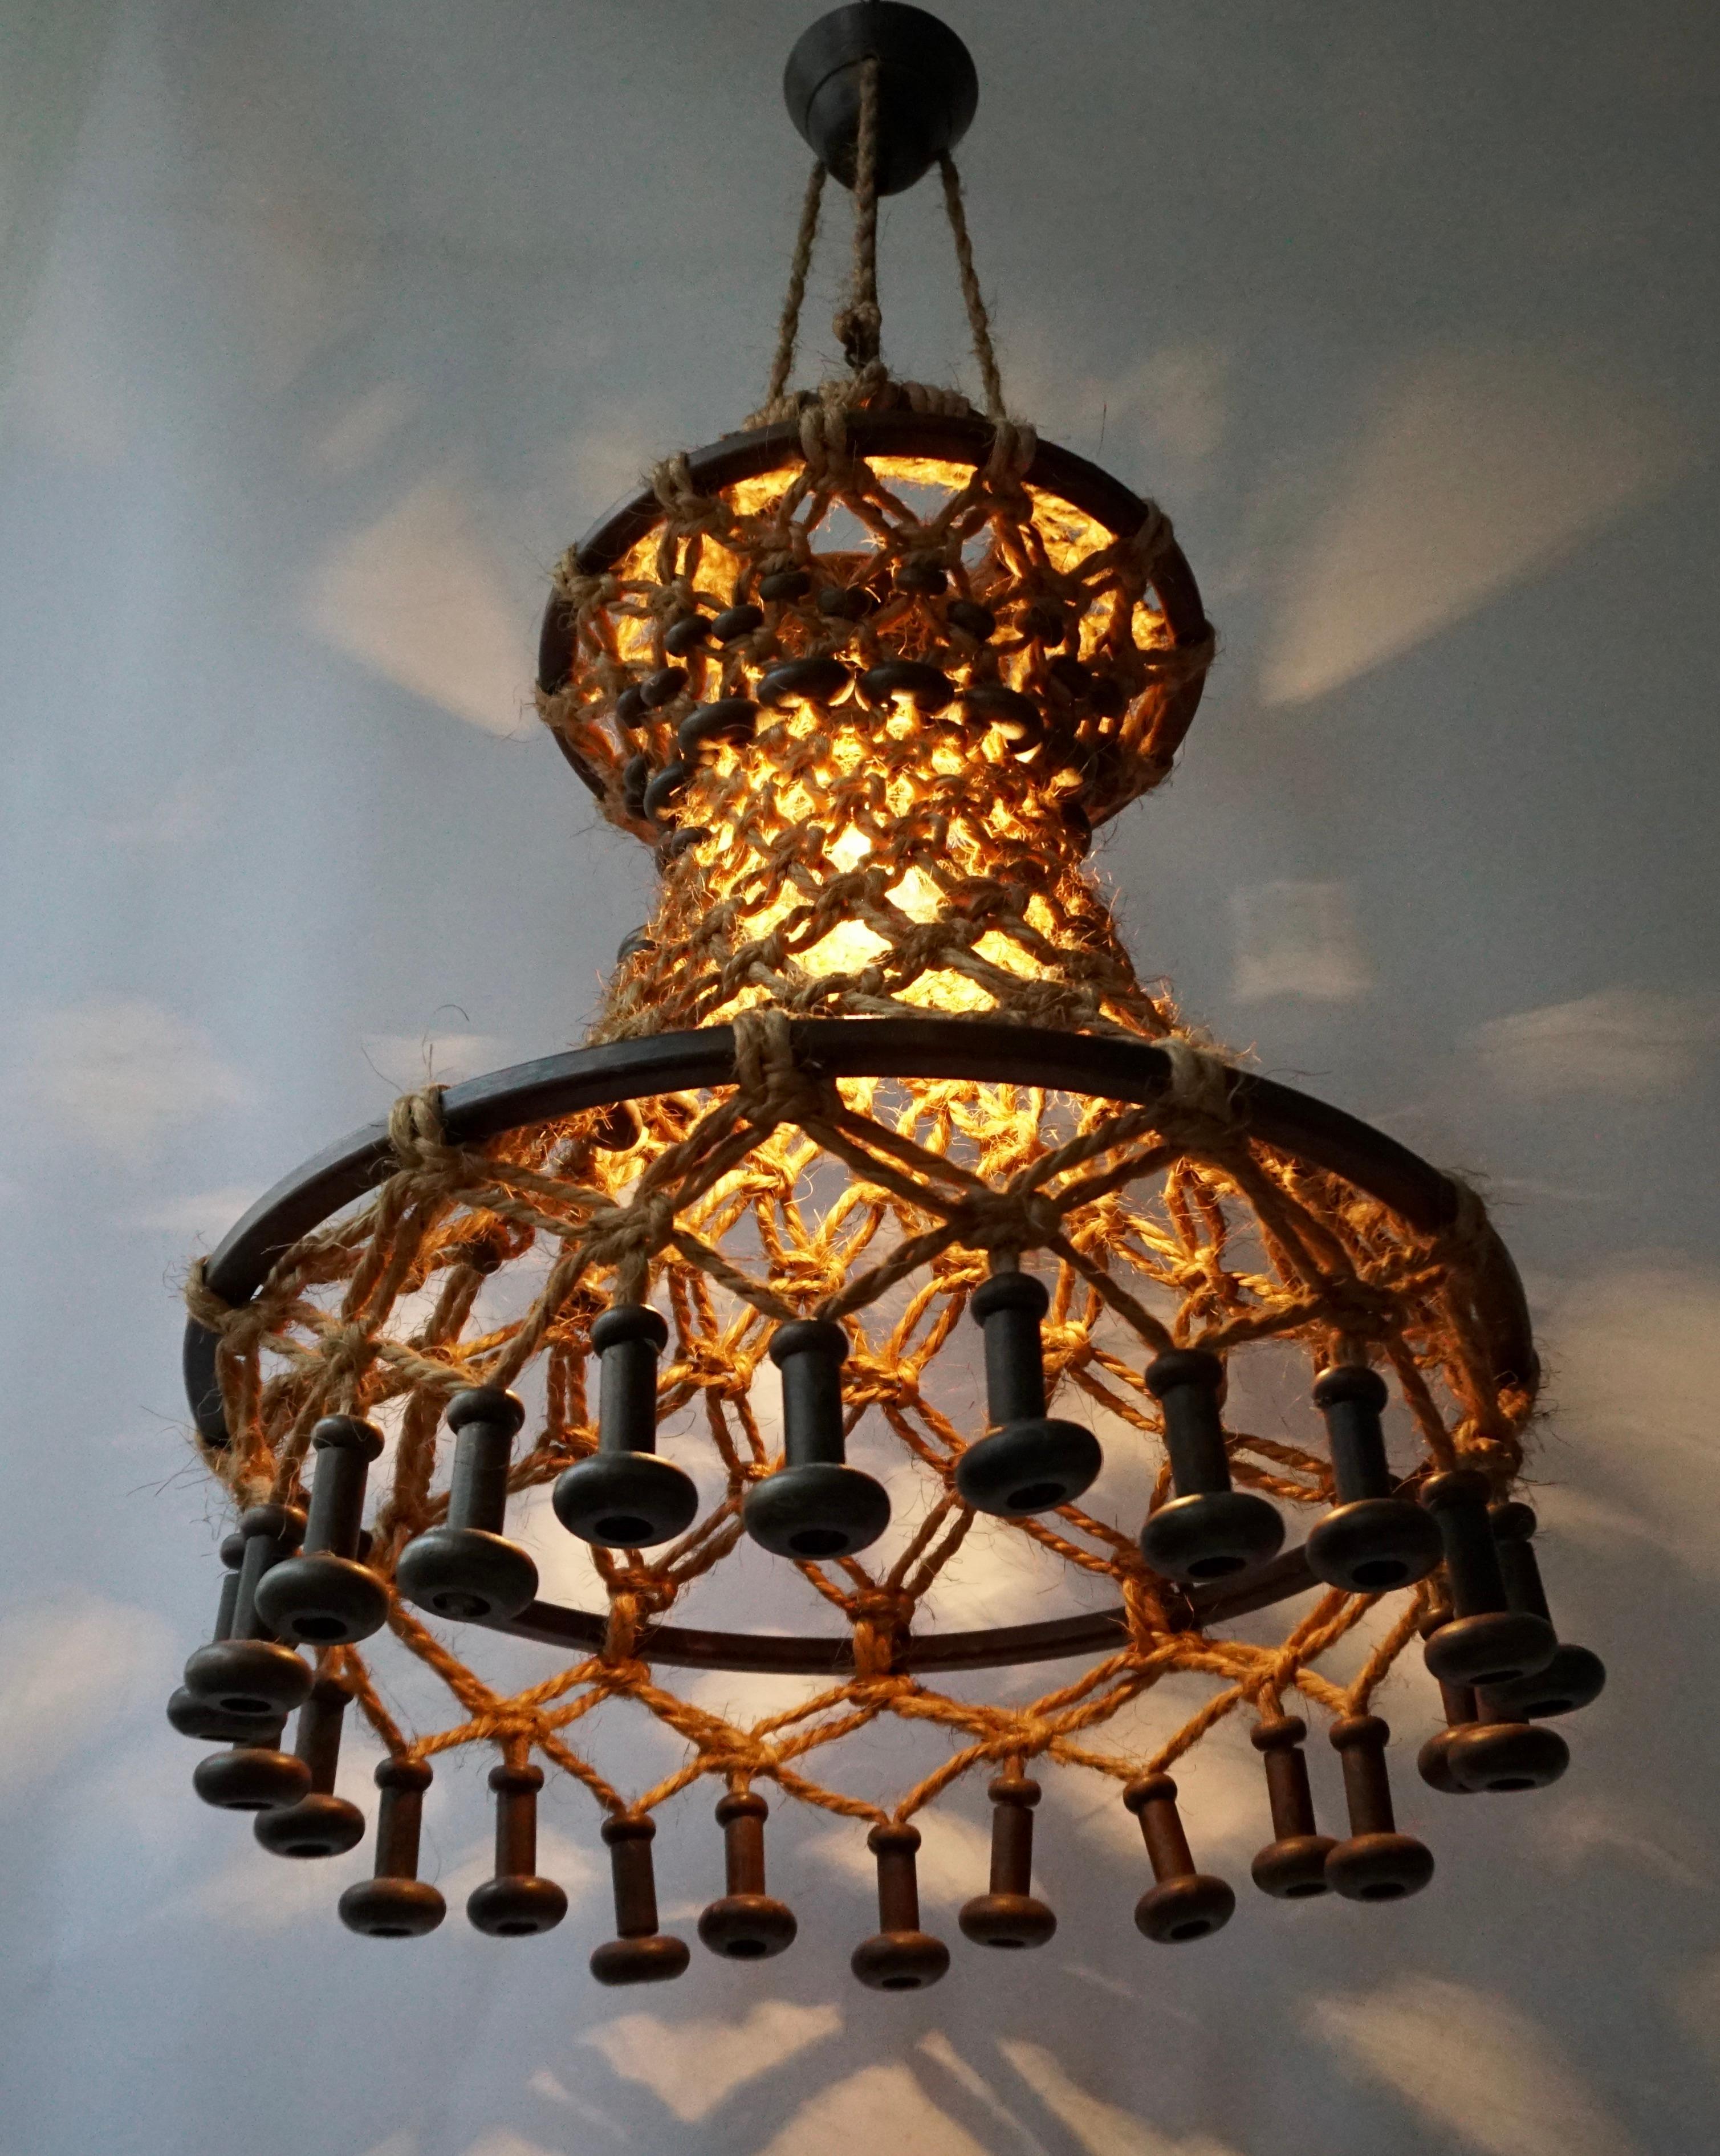 Belgian Hand Knotted Chandelier with Natural Rope and Wood